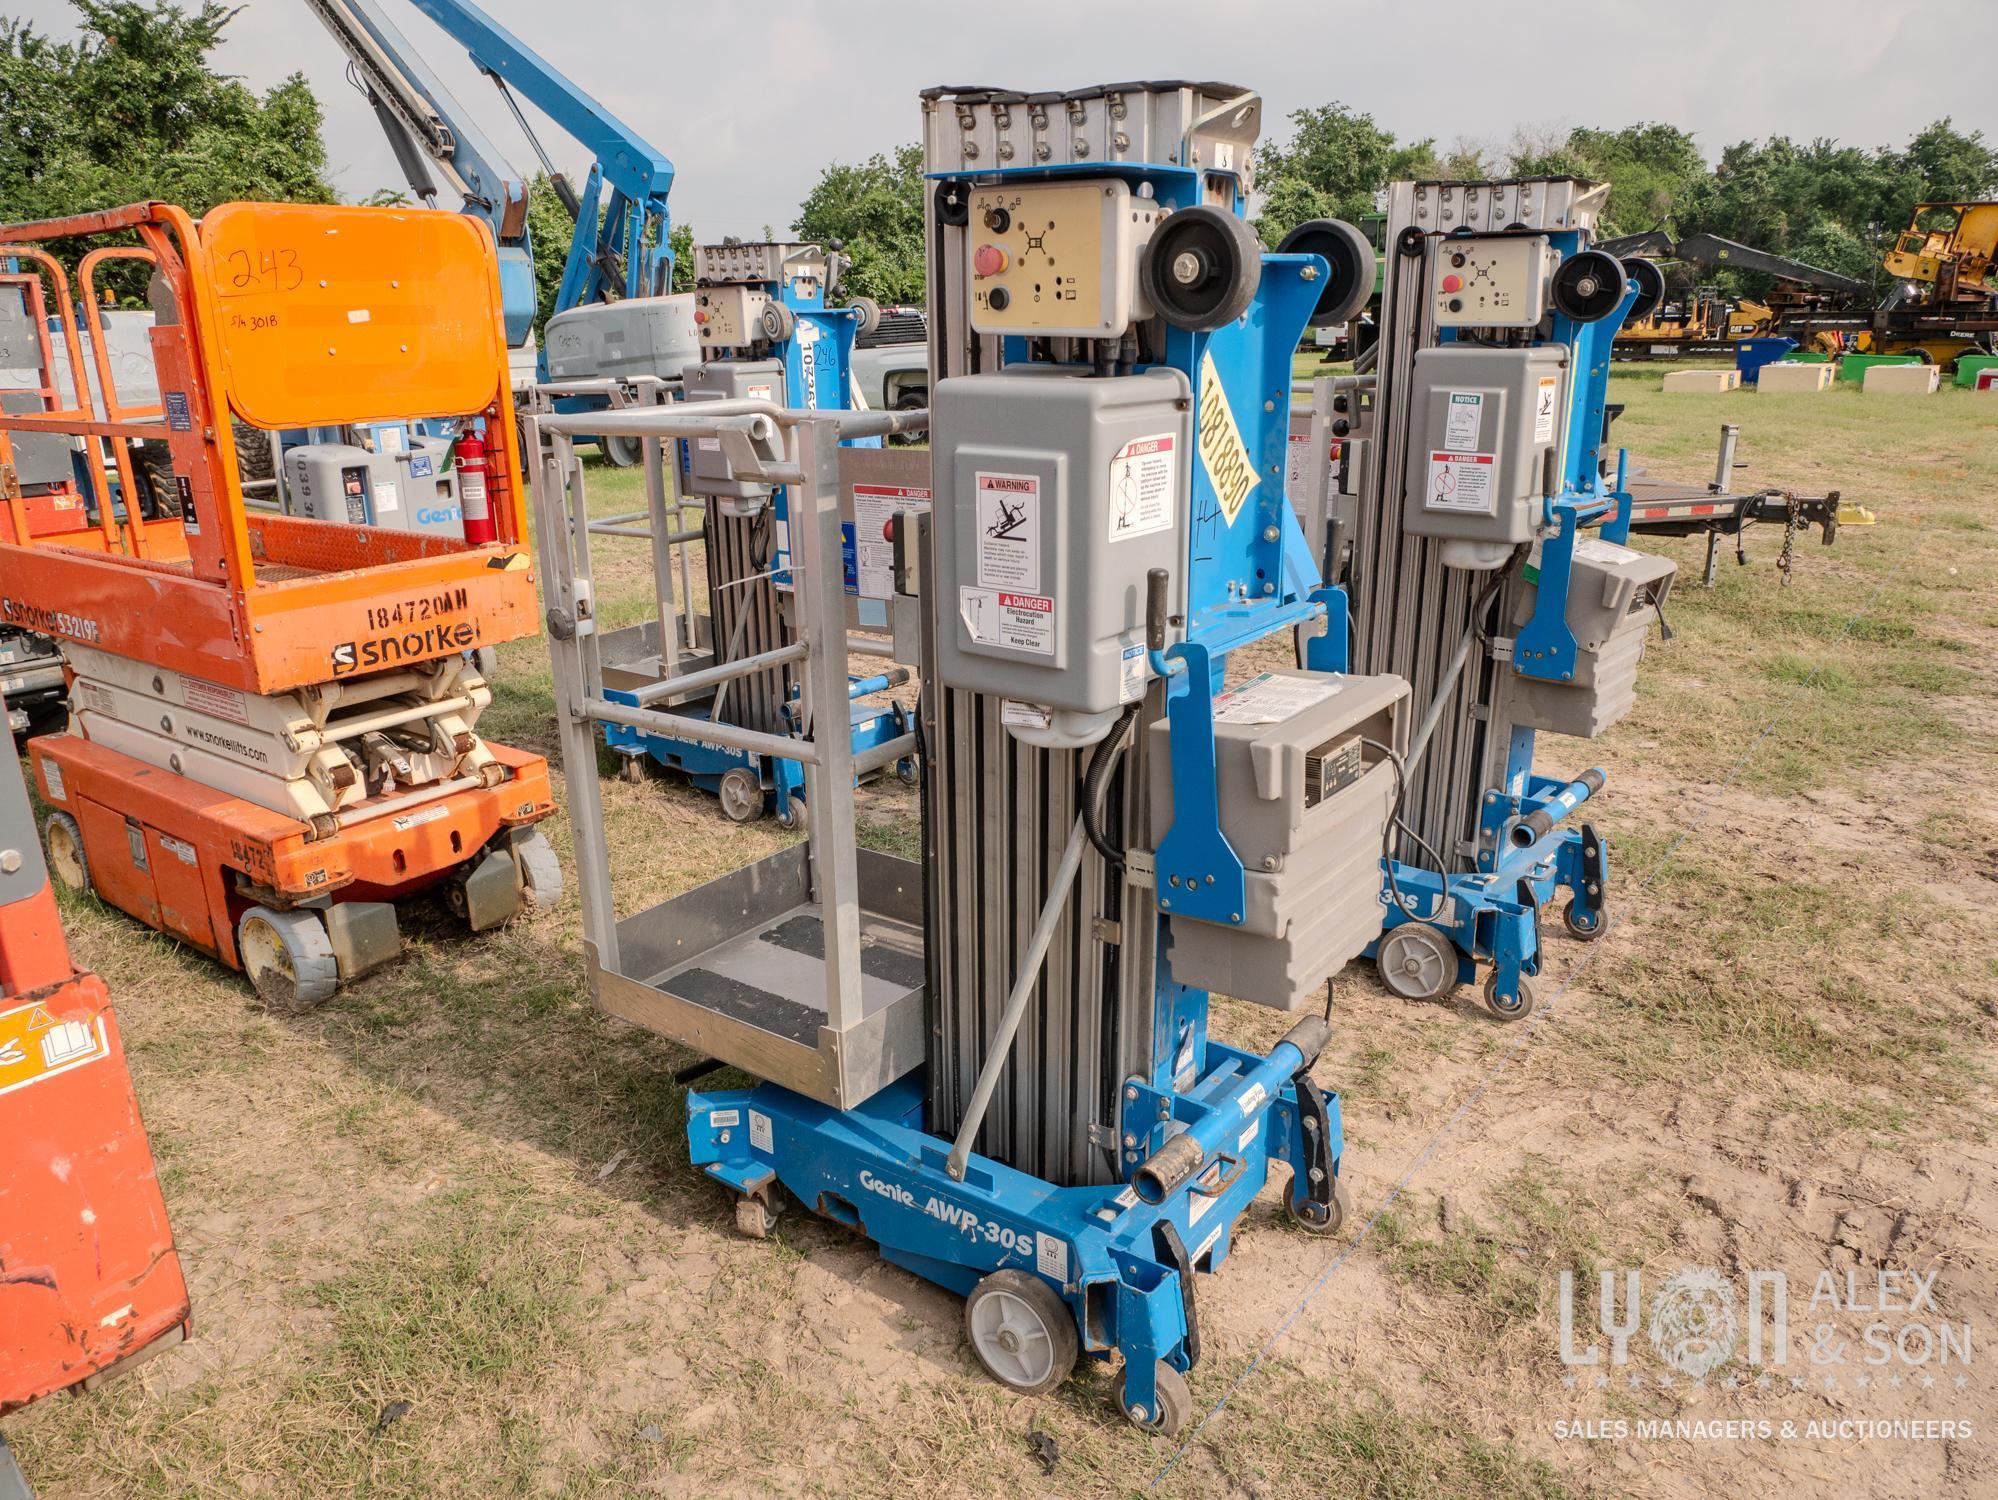 2018 GENIE AWP-30SDC SCISSOR LIFT SN:AWPG-93309 electric powered, equipped with 30ft. Platform